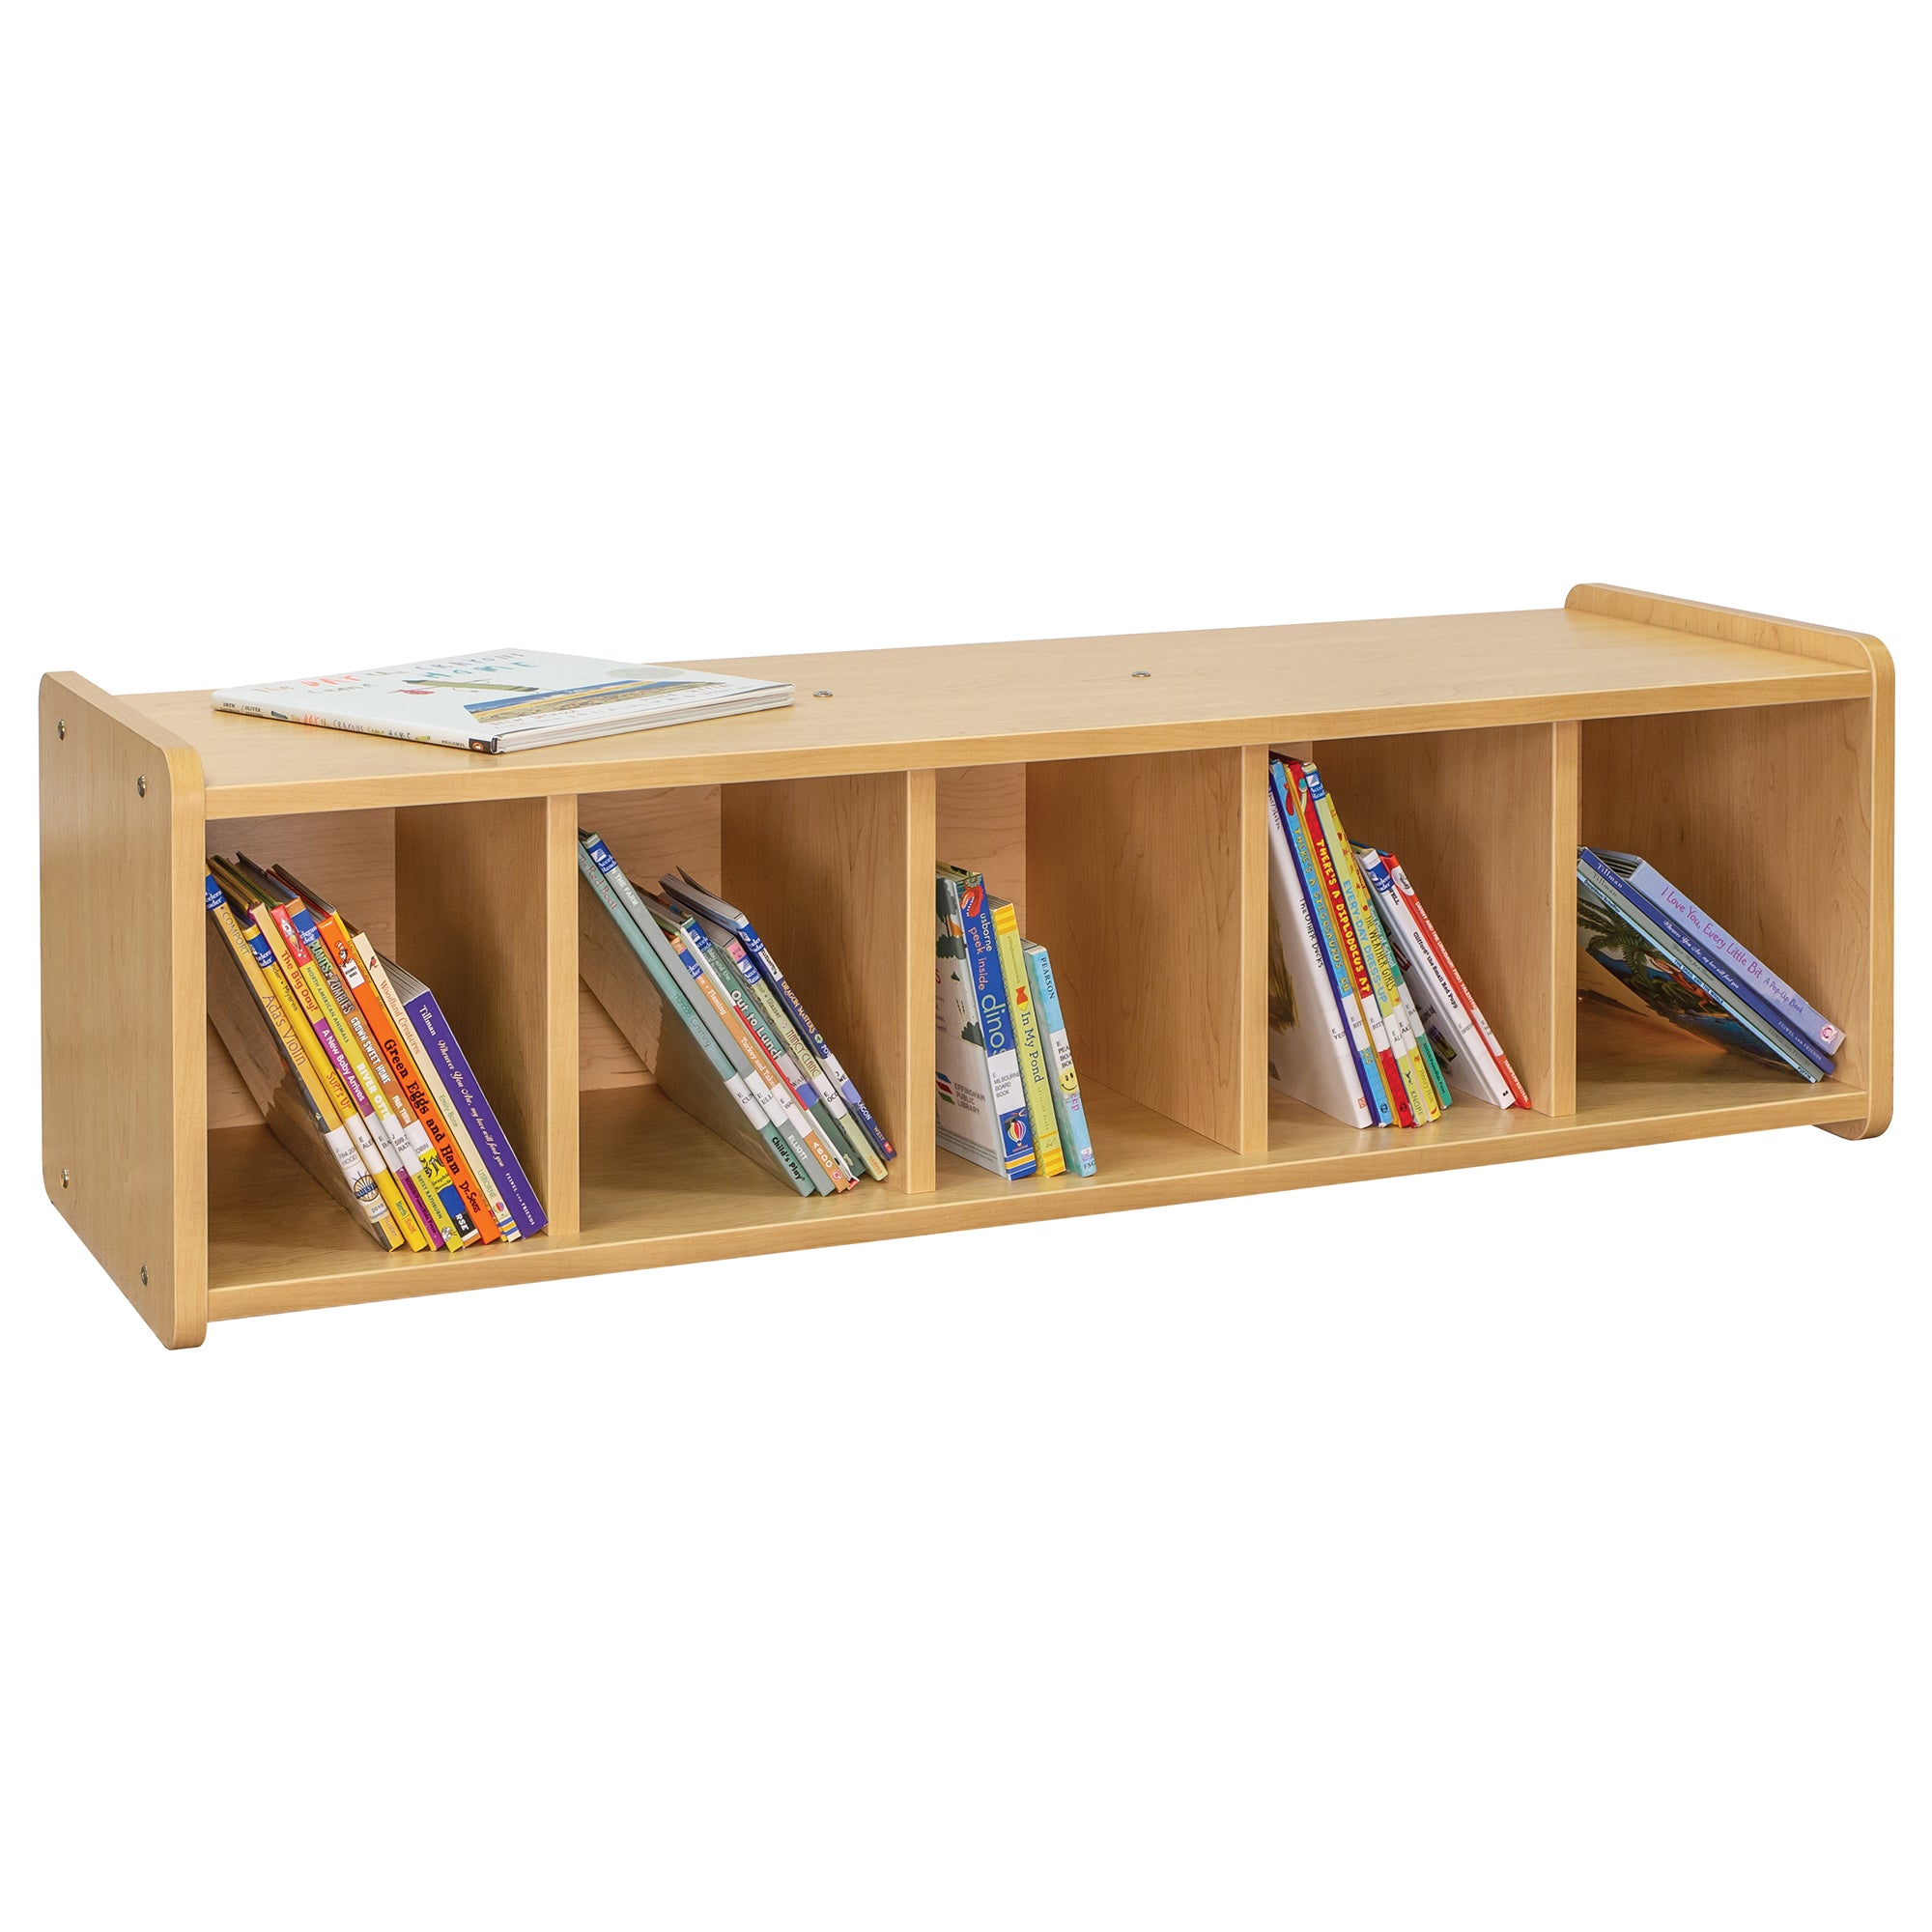 Five Comparment Book Bench Child's Cubbie used for Toy or Book Storage.